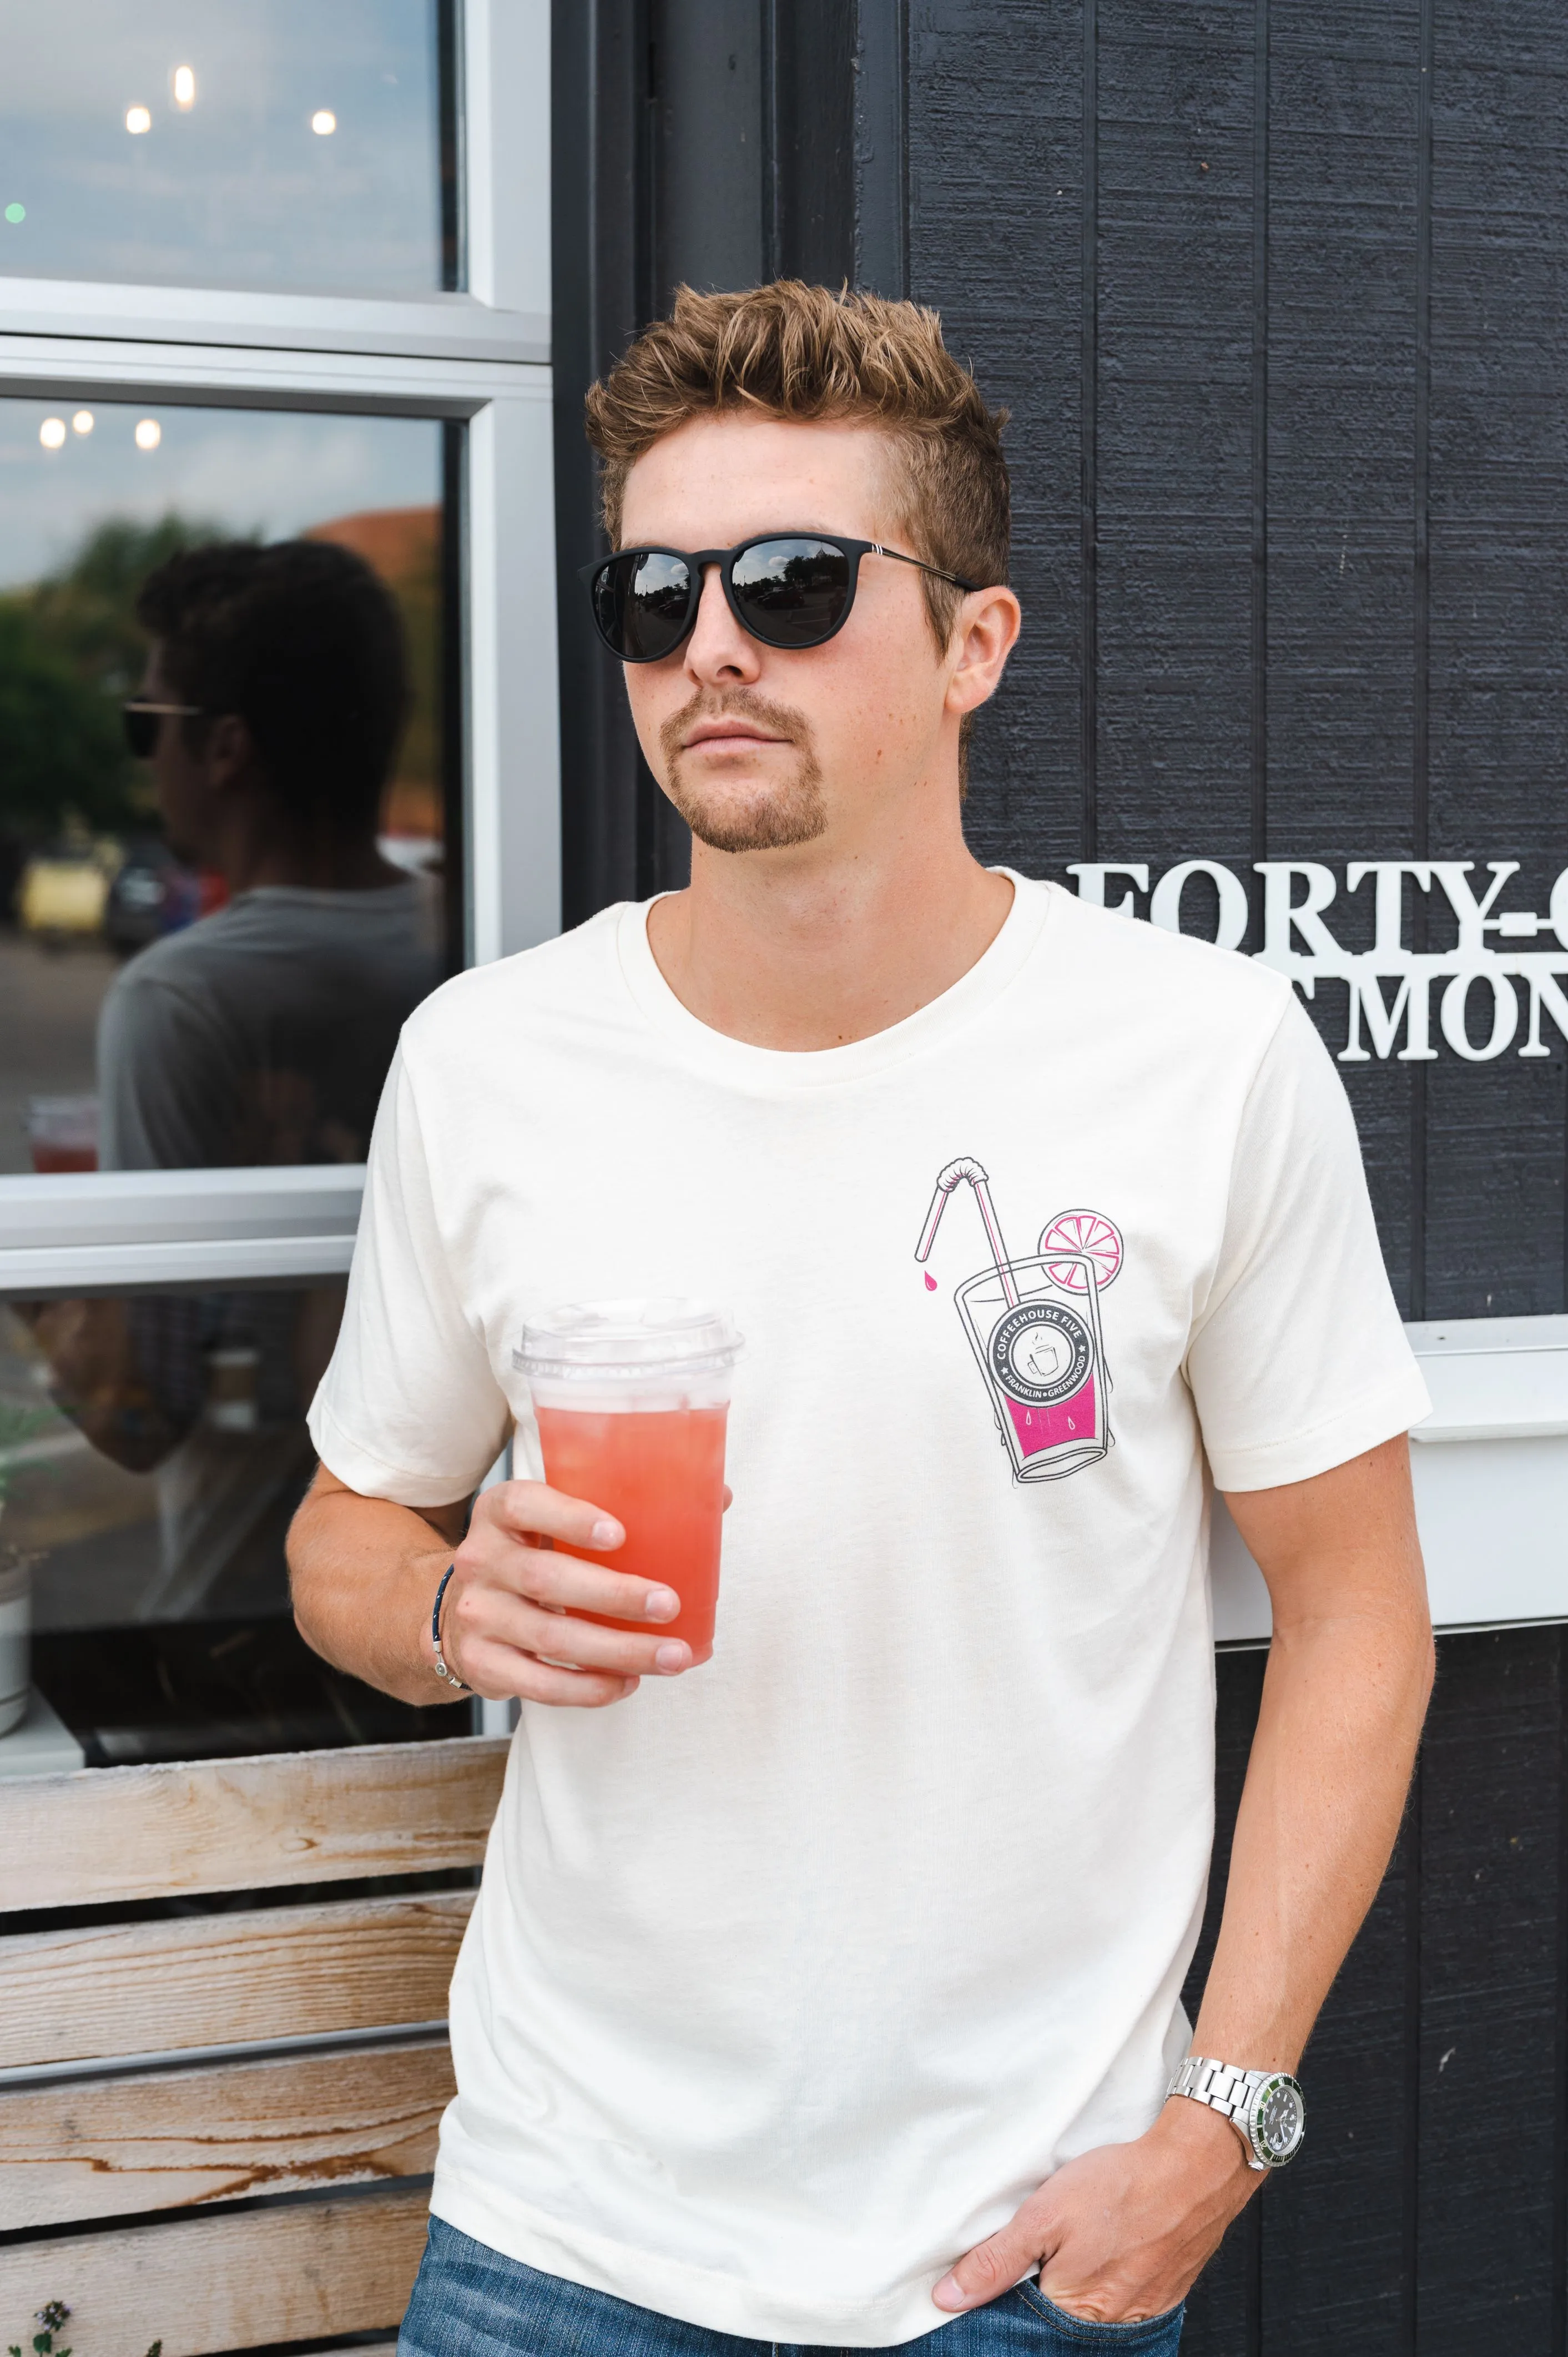 Man in sunglasses and white t-shirt with graphic design holding a pink beverage, standing in front of a dark building with window reflections.